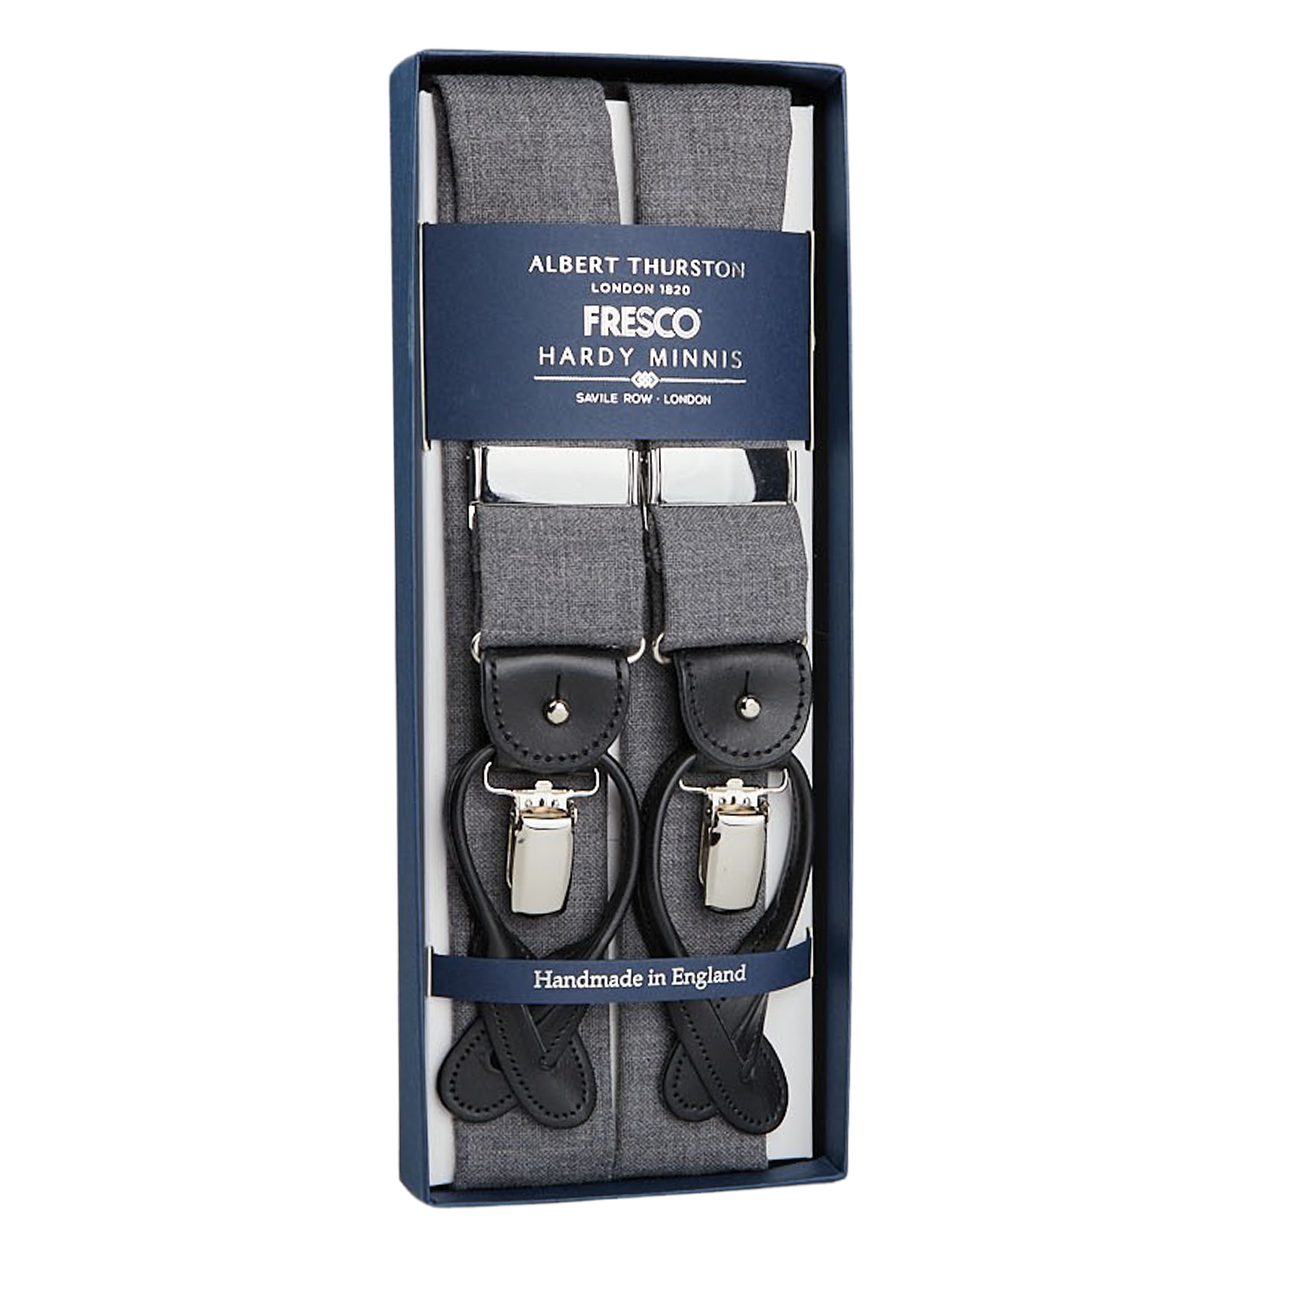 Gray wool suspenders with leather accents by Albert Thurston in a blue gift box, labeled "Handmade in England" using Hardy Minnis grey fresco fabric.